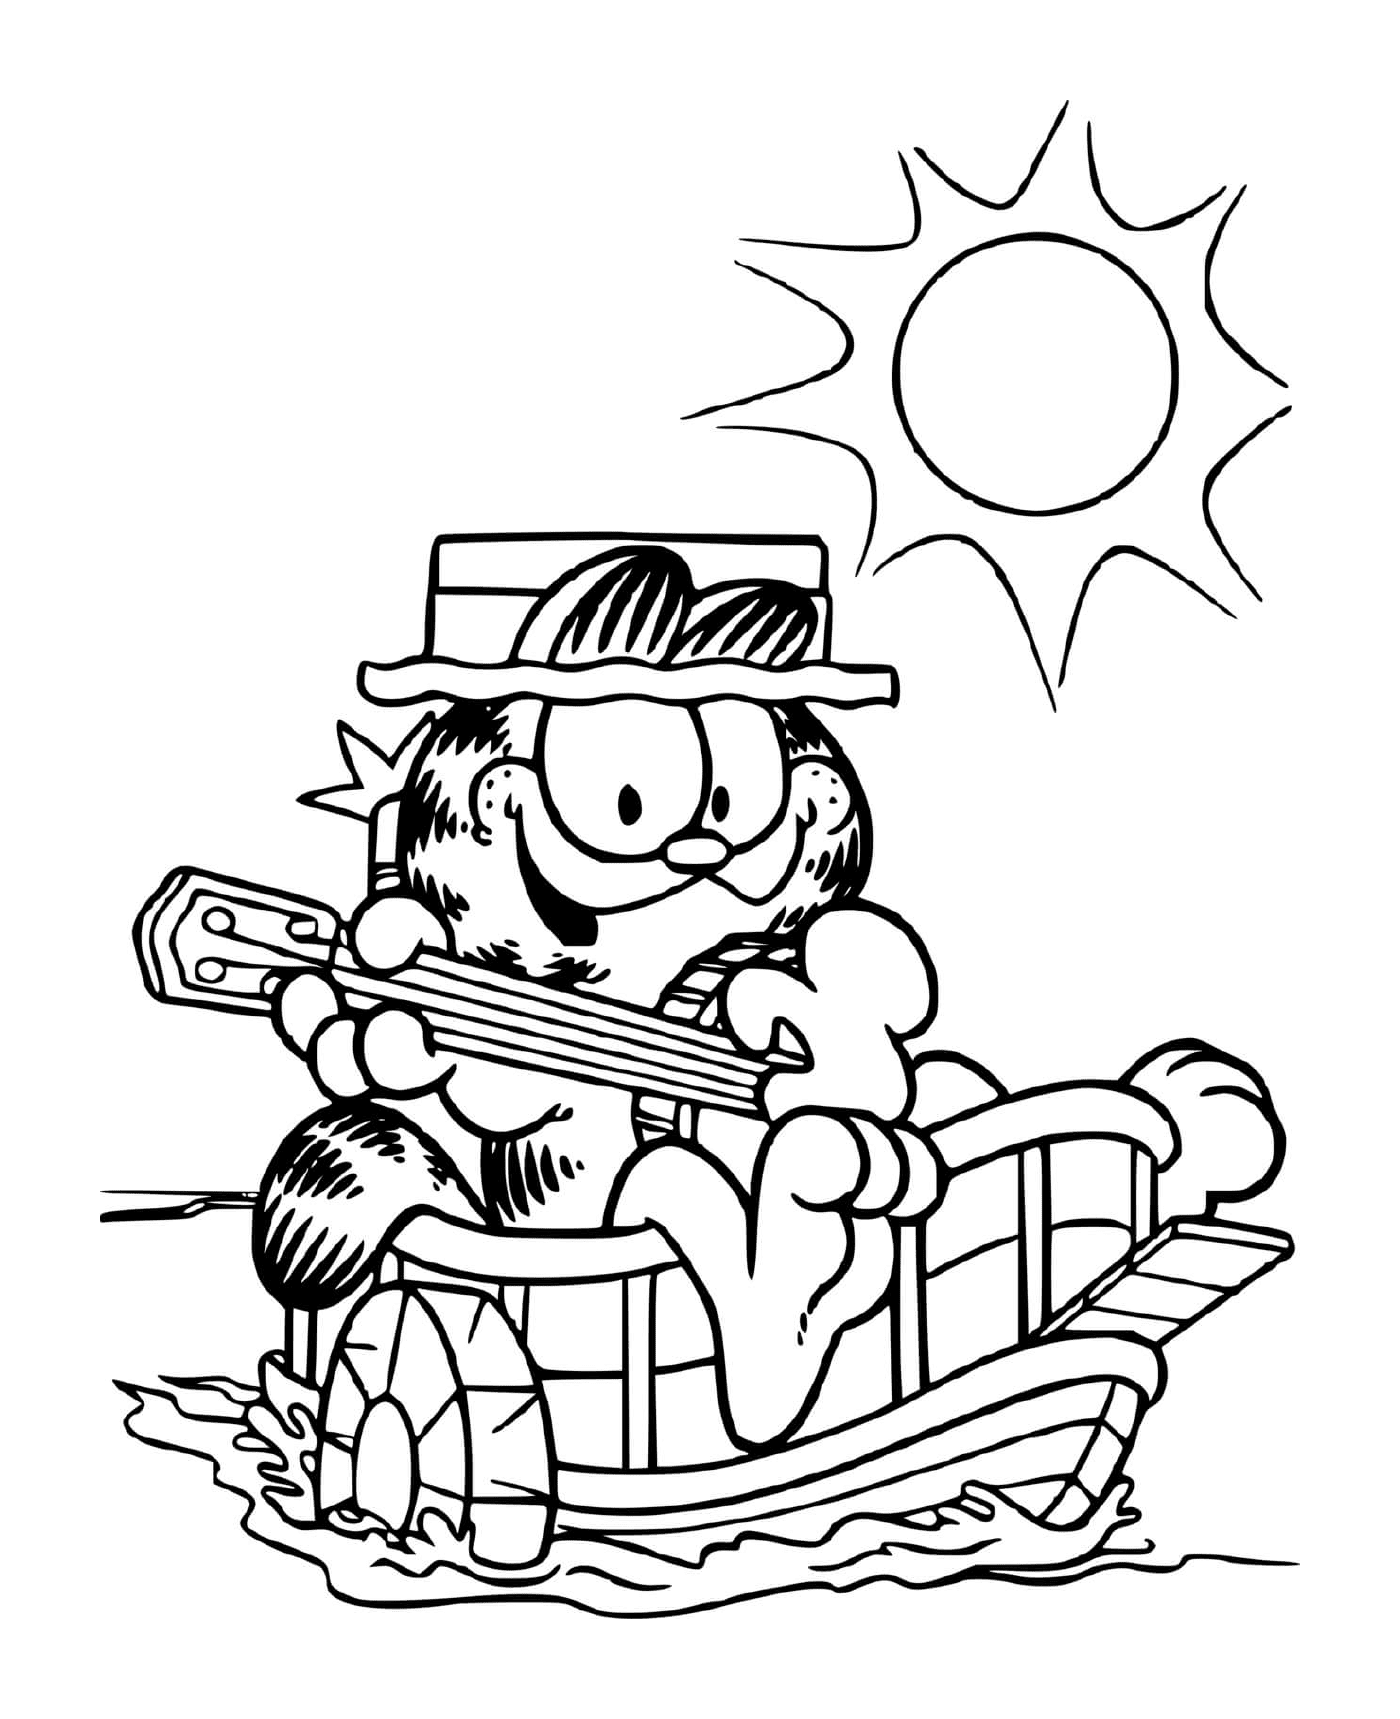  Garfield plays guitar on his boat 